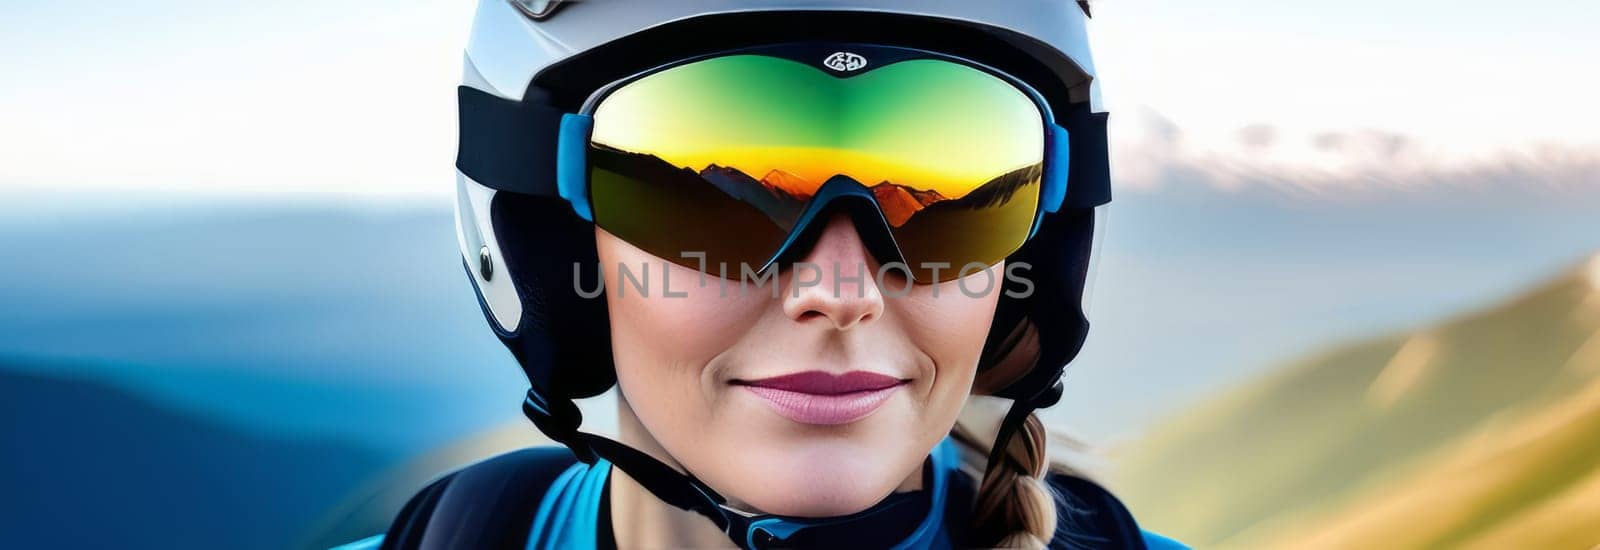 Woman wearing helmet and sunglasses glasses stands confidently before towering mountain backdrop ready for adventure, exploration.She may be gearing up for bicycle ride or some other outdoor activity. by Angelsmoon